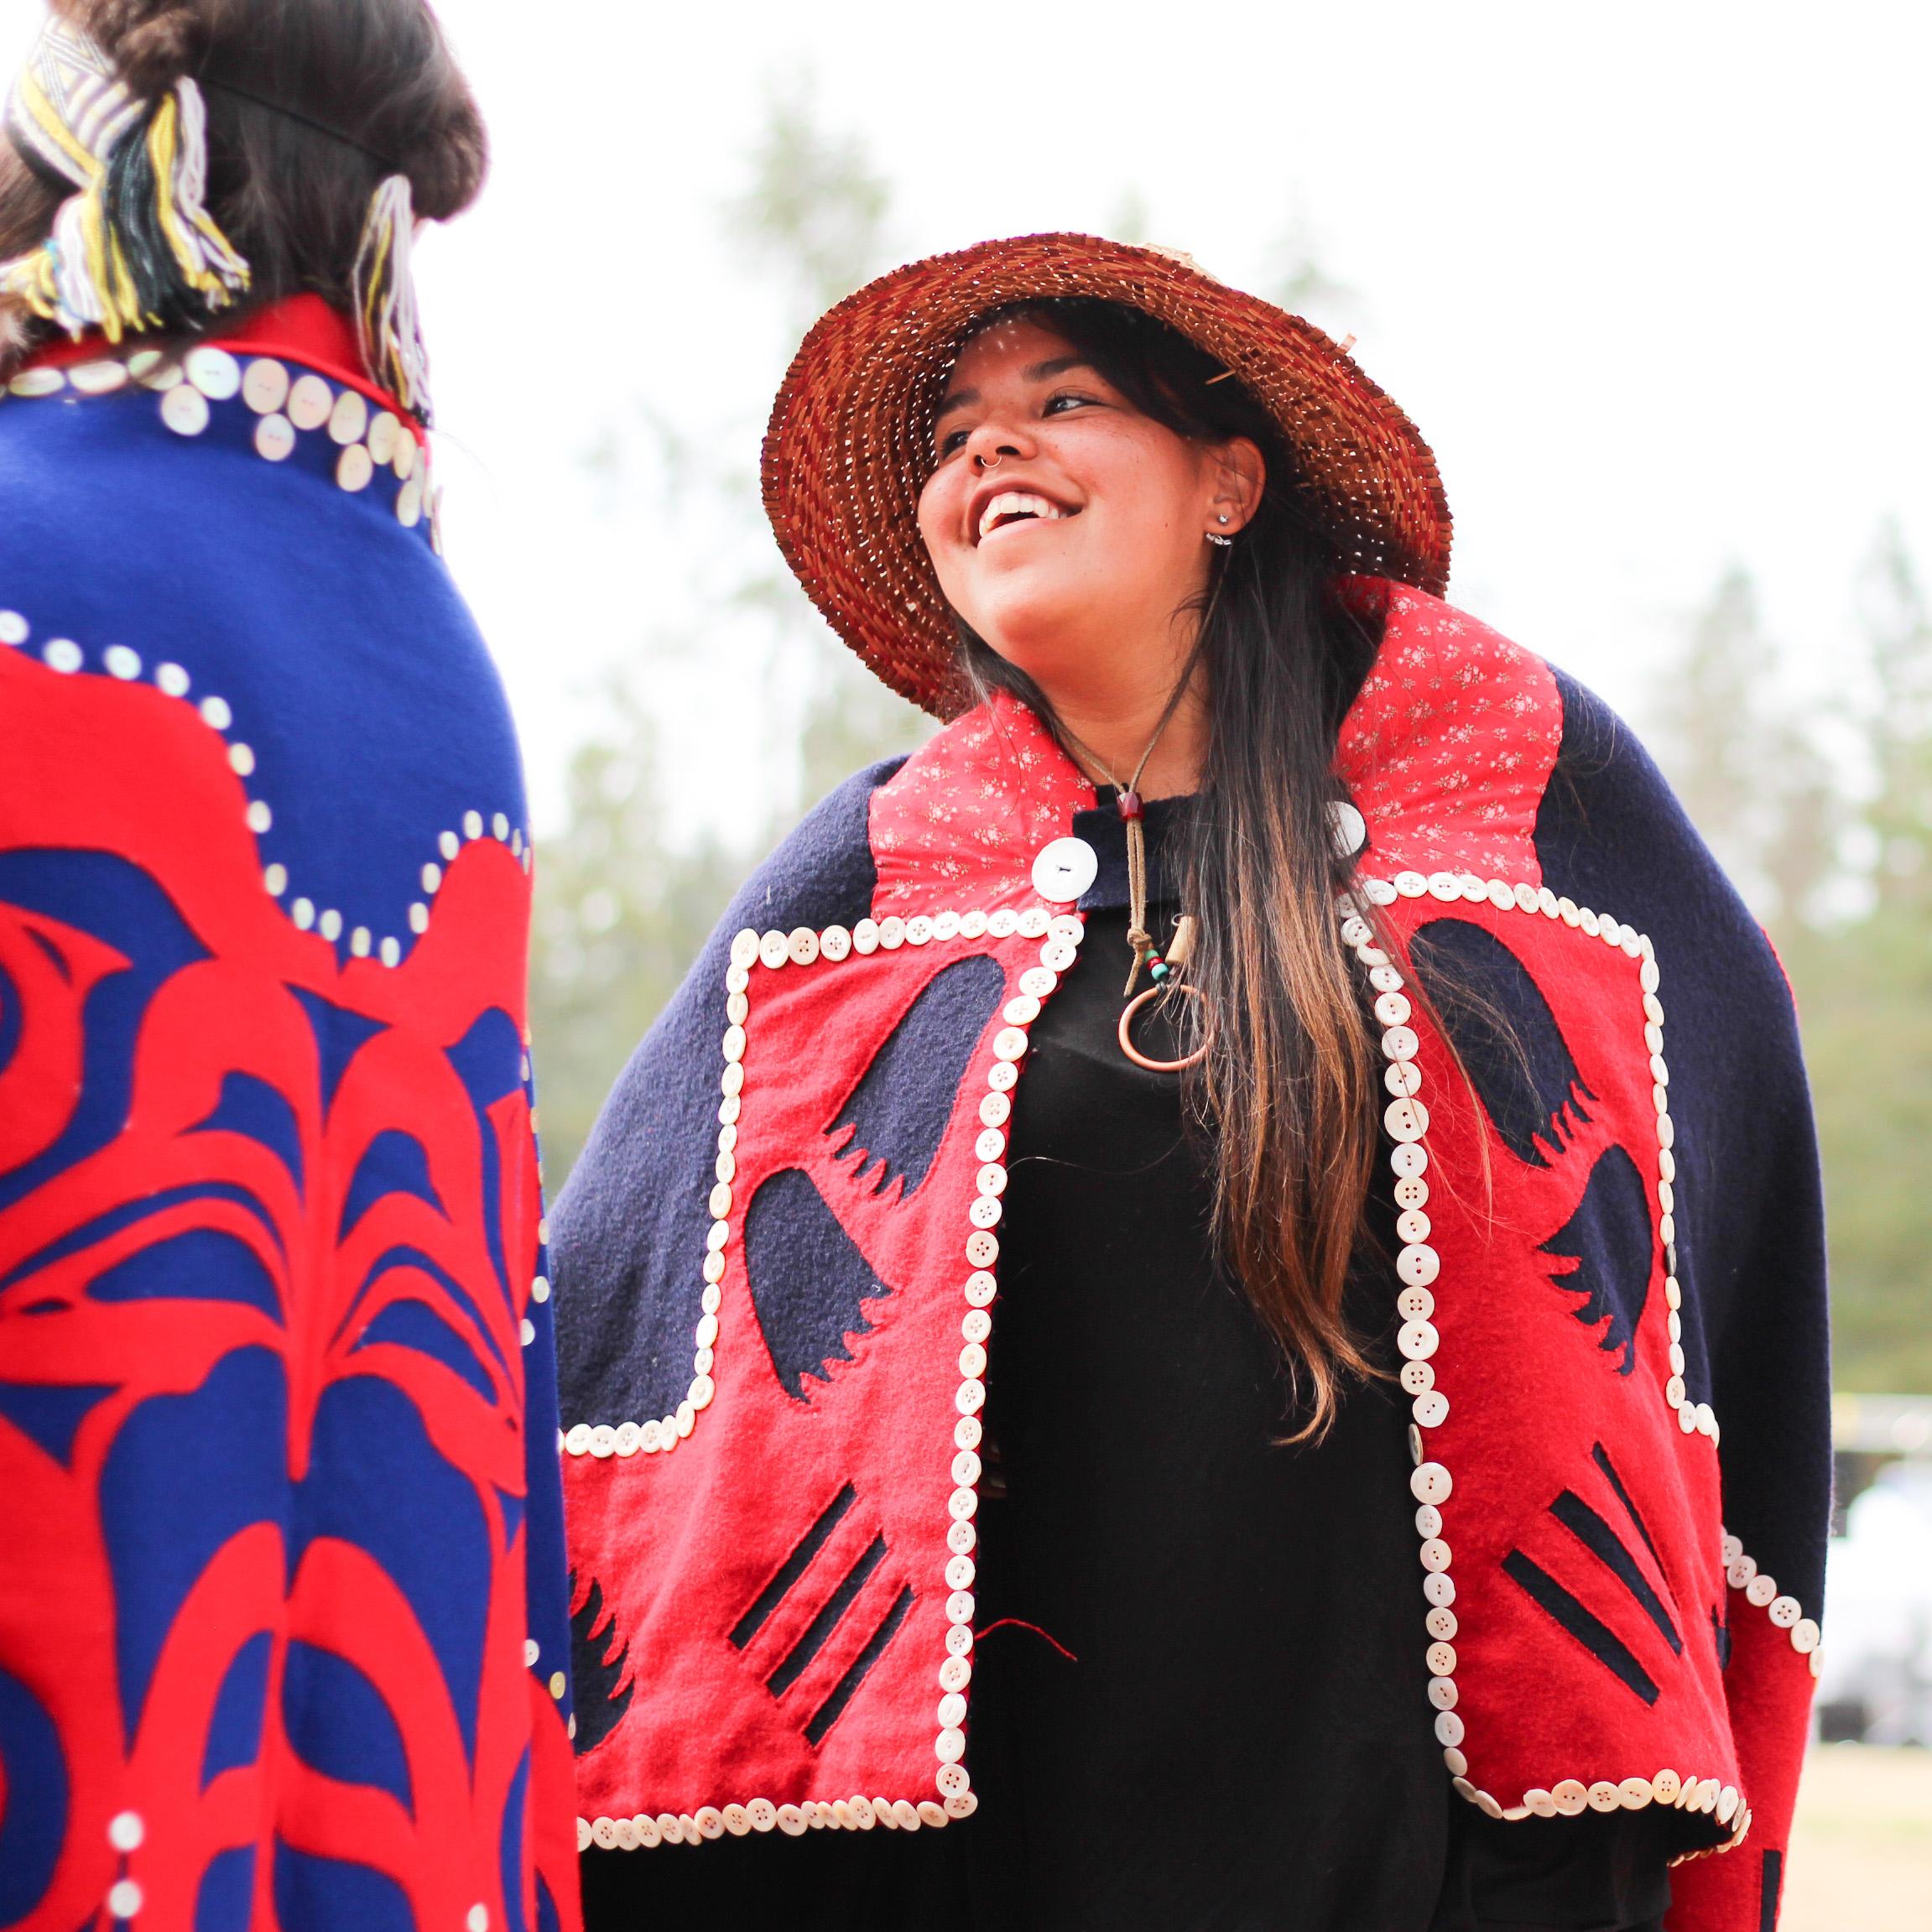 an Indigenous person with long hair smiles while wearing their cultural regalia. - photo by Ricardo Ibarra